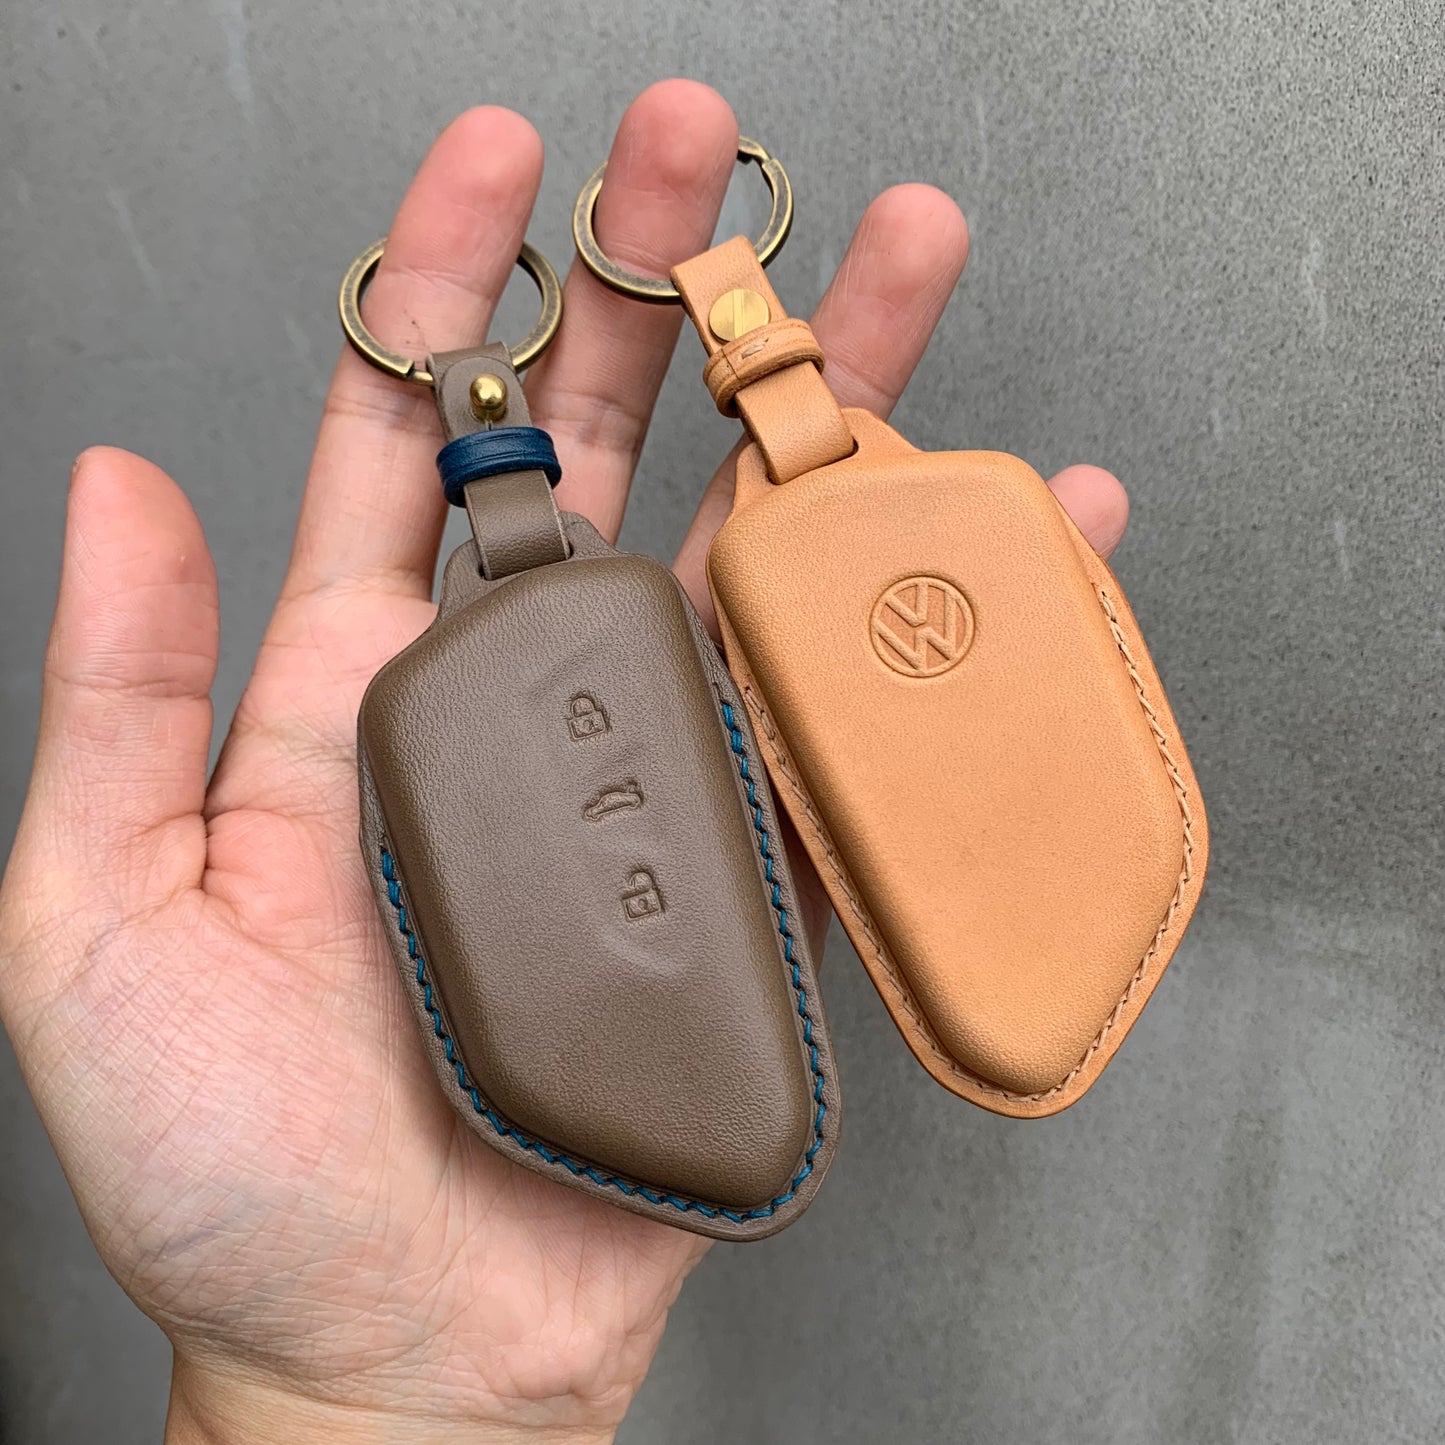 Volkswagen key fob cover, Buttero leather